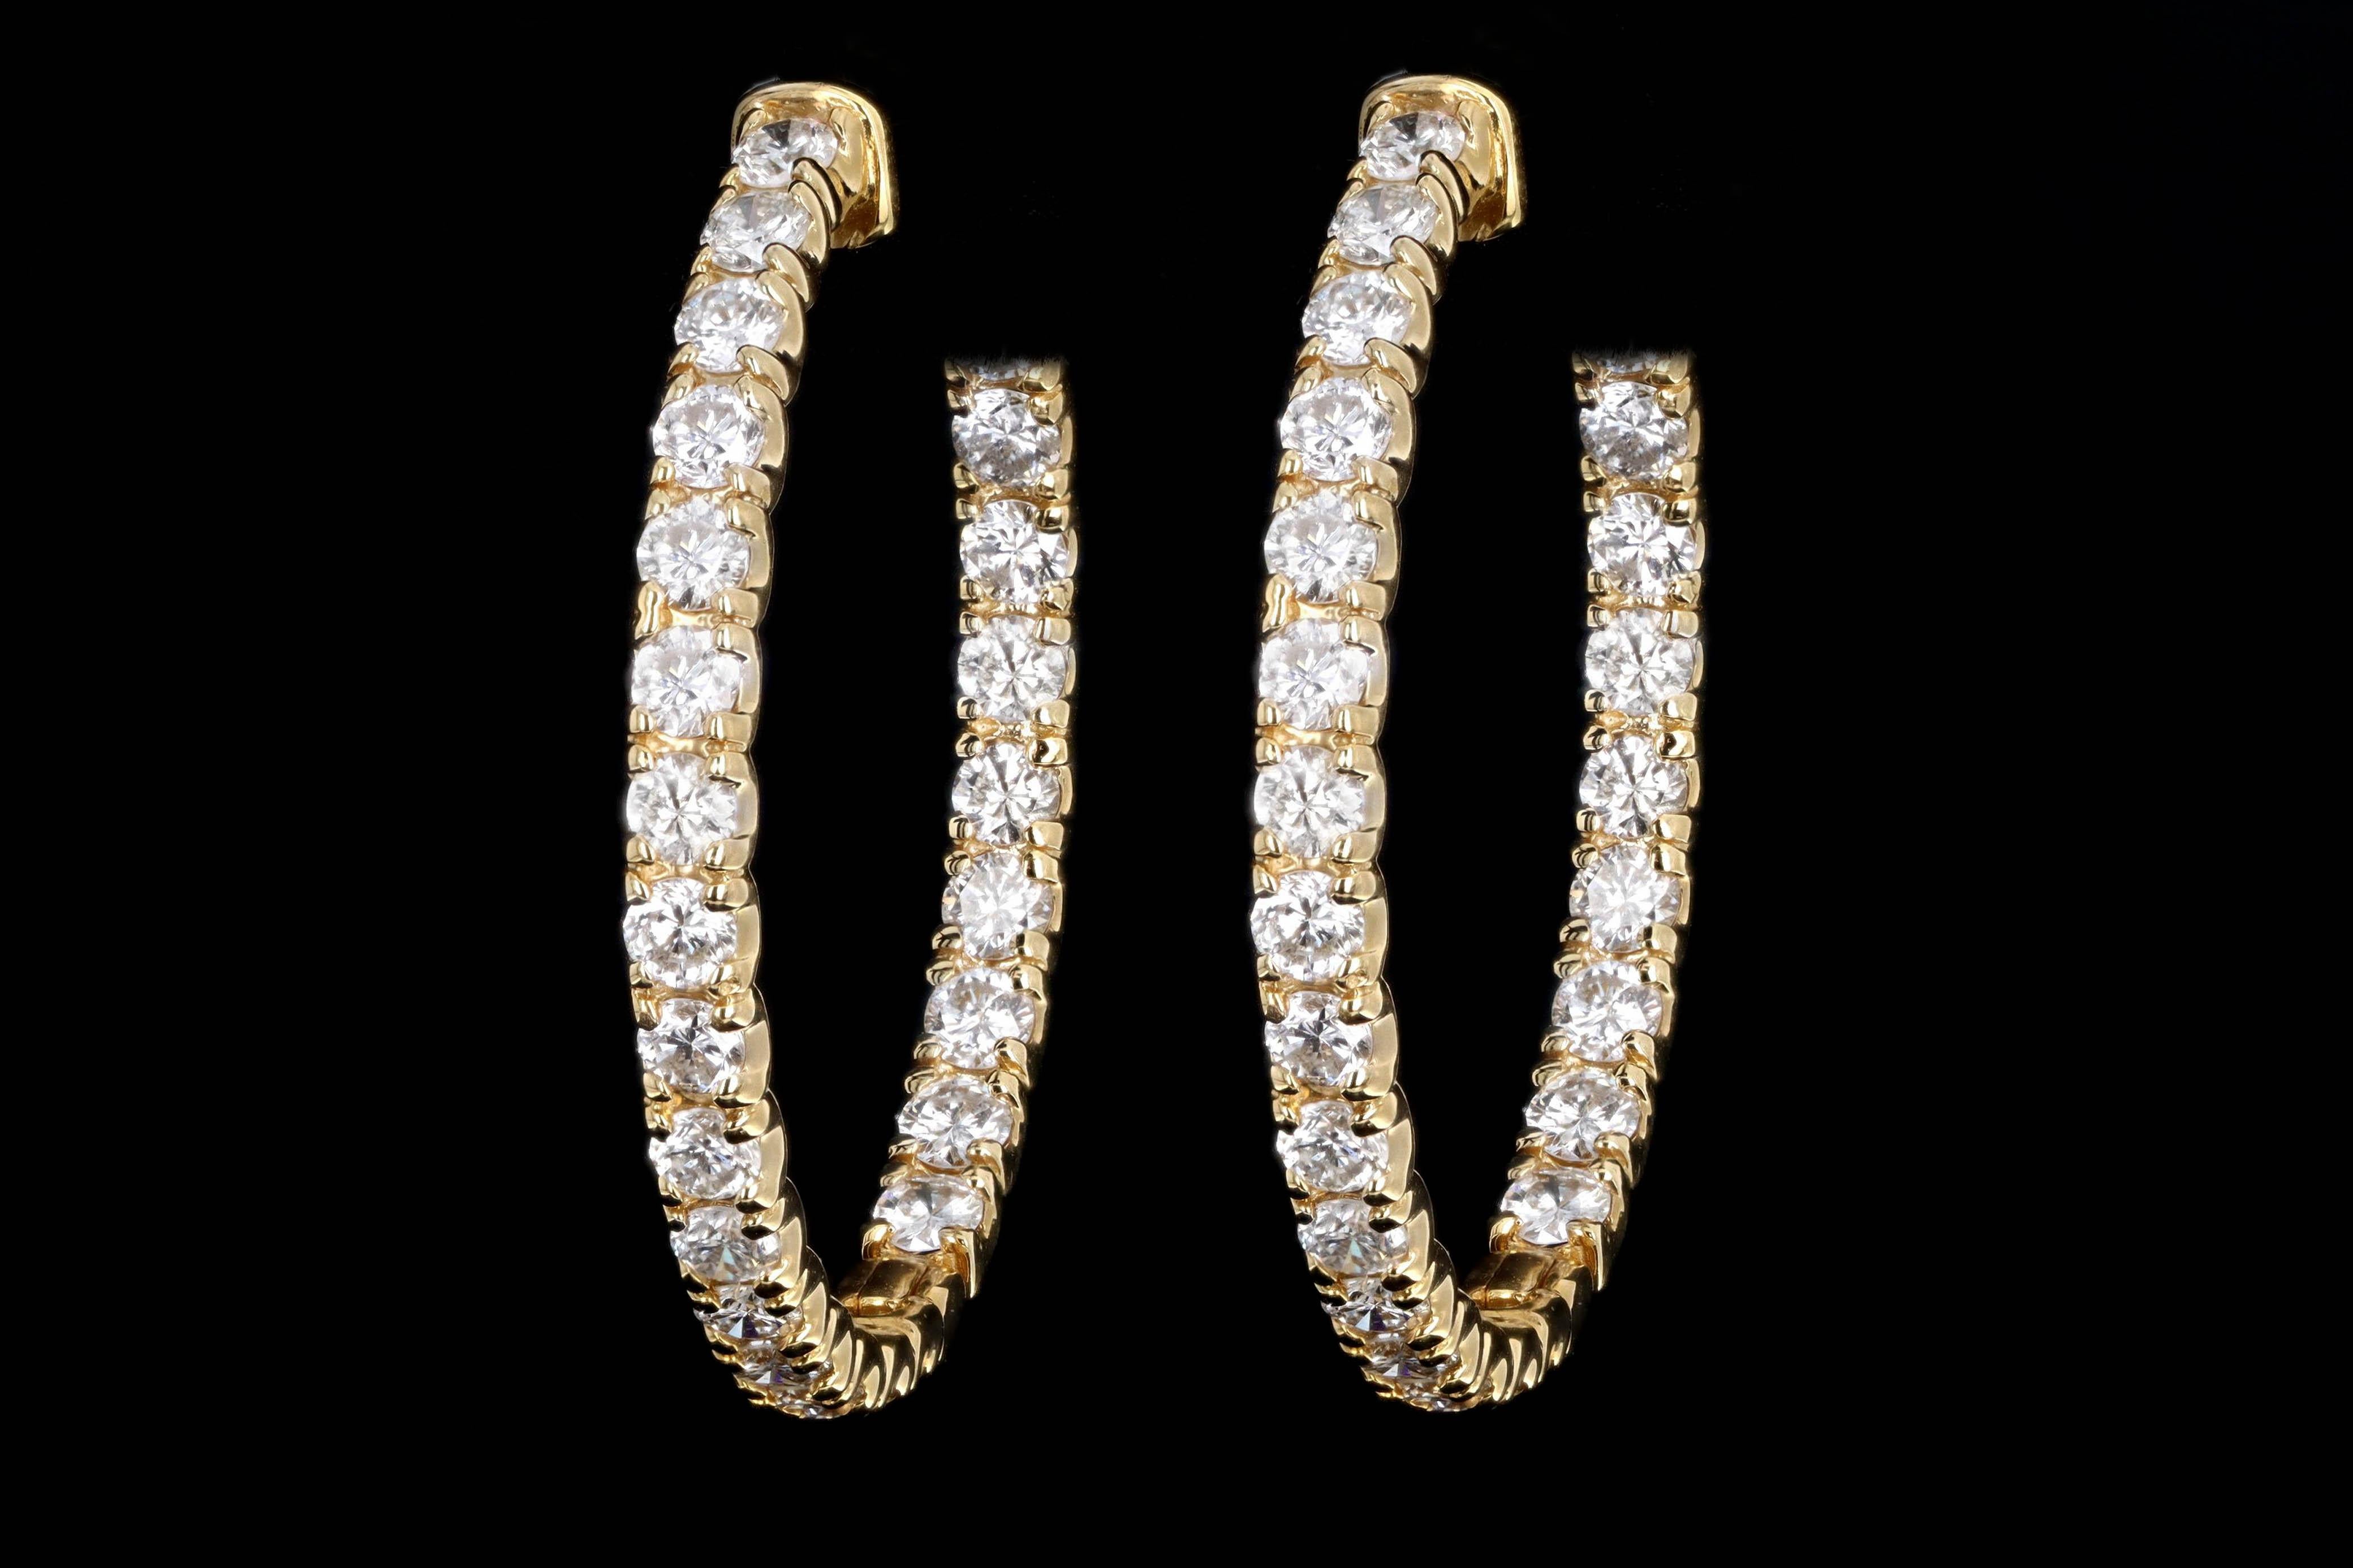 Era: New

Composition: 14K Yellow Gold

Primary Stone: Fifty Two Round Brilliant Cut Diamonds

Total Carat Weight: Approximately 4.61 Carats 

Color/Clarity: G/H - SI1/2

Earring Diameter: 1.25 Inches

Earring Weight: 11.6 Grams

Item Barcode: 239022